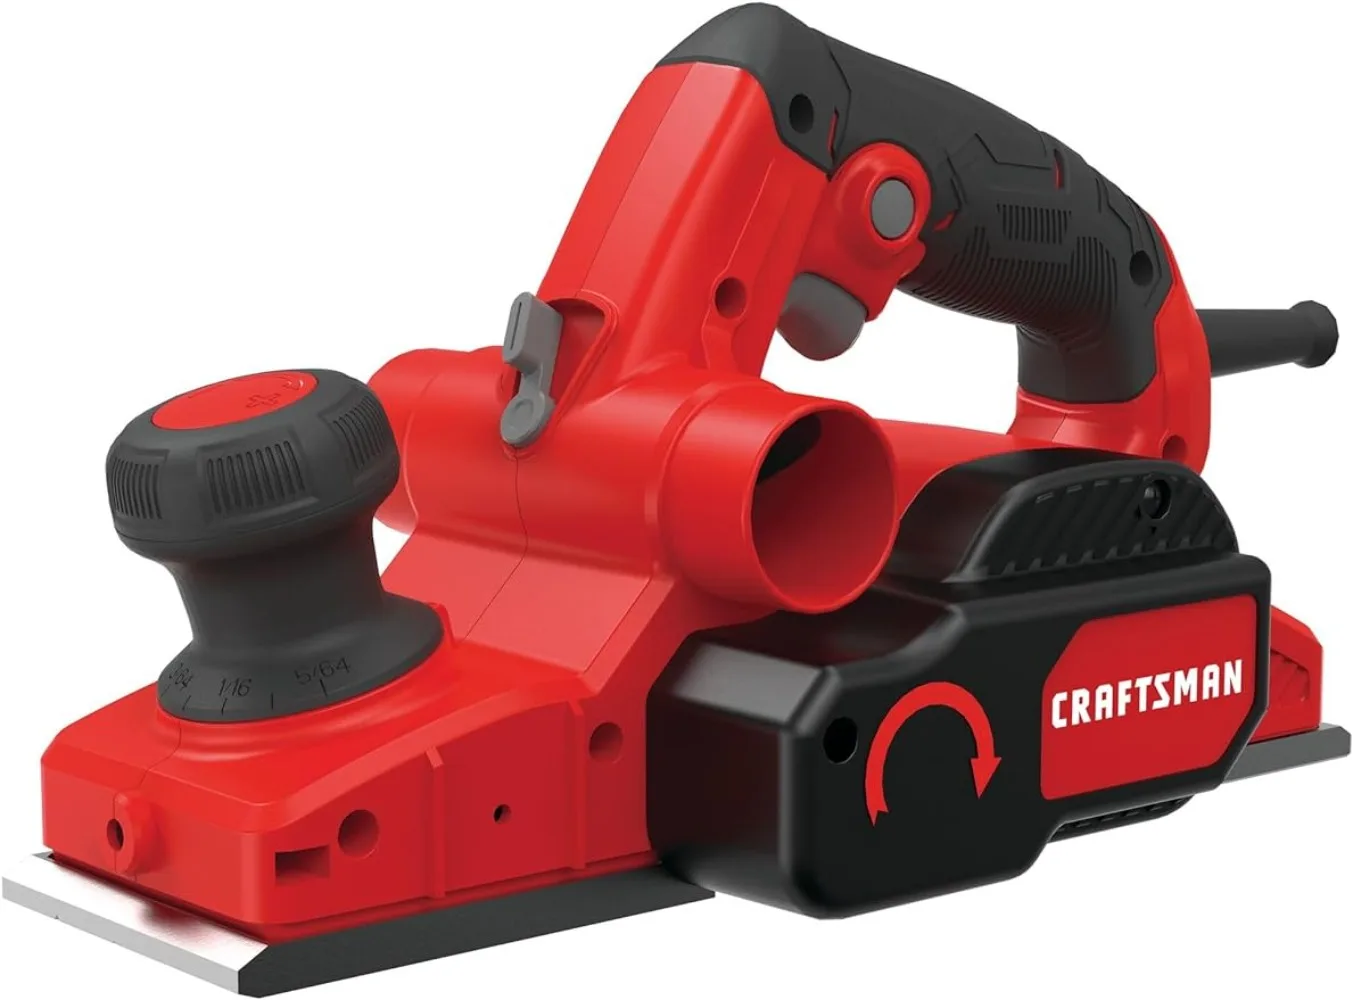 

CRAFTSMAN Wood Planer, Hand Planer with Blades, Wrench and Edge Guide, 5/64-inch, 16,500 RPM, 6 Amp, Corded (CMEW300)